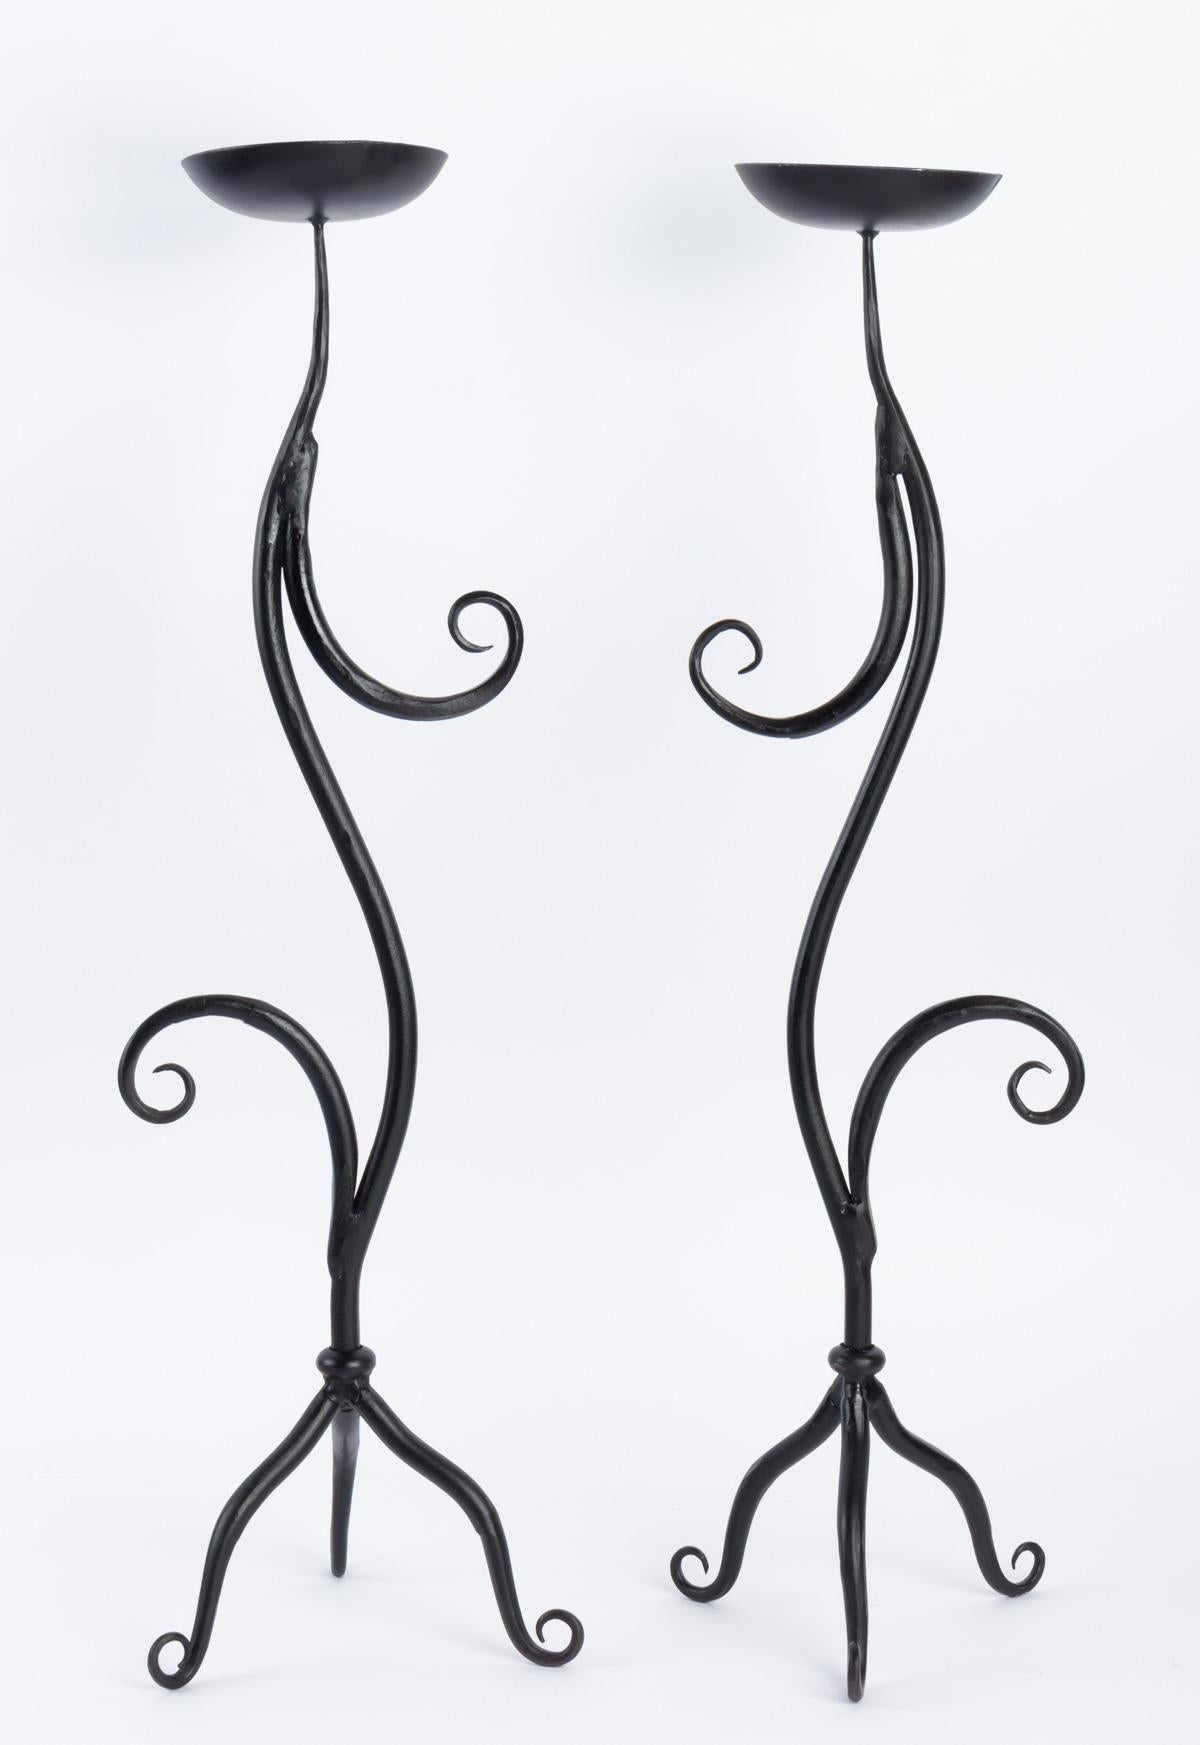 Charming pair of black wrought iron candlesticks, 1960. Ateliers Vallauris.
Each candlestick is composed of a moving rod embellished with two arms forming loops resting on a tripod ending in coils. On the upper part a large cup receives